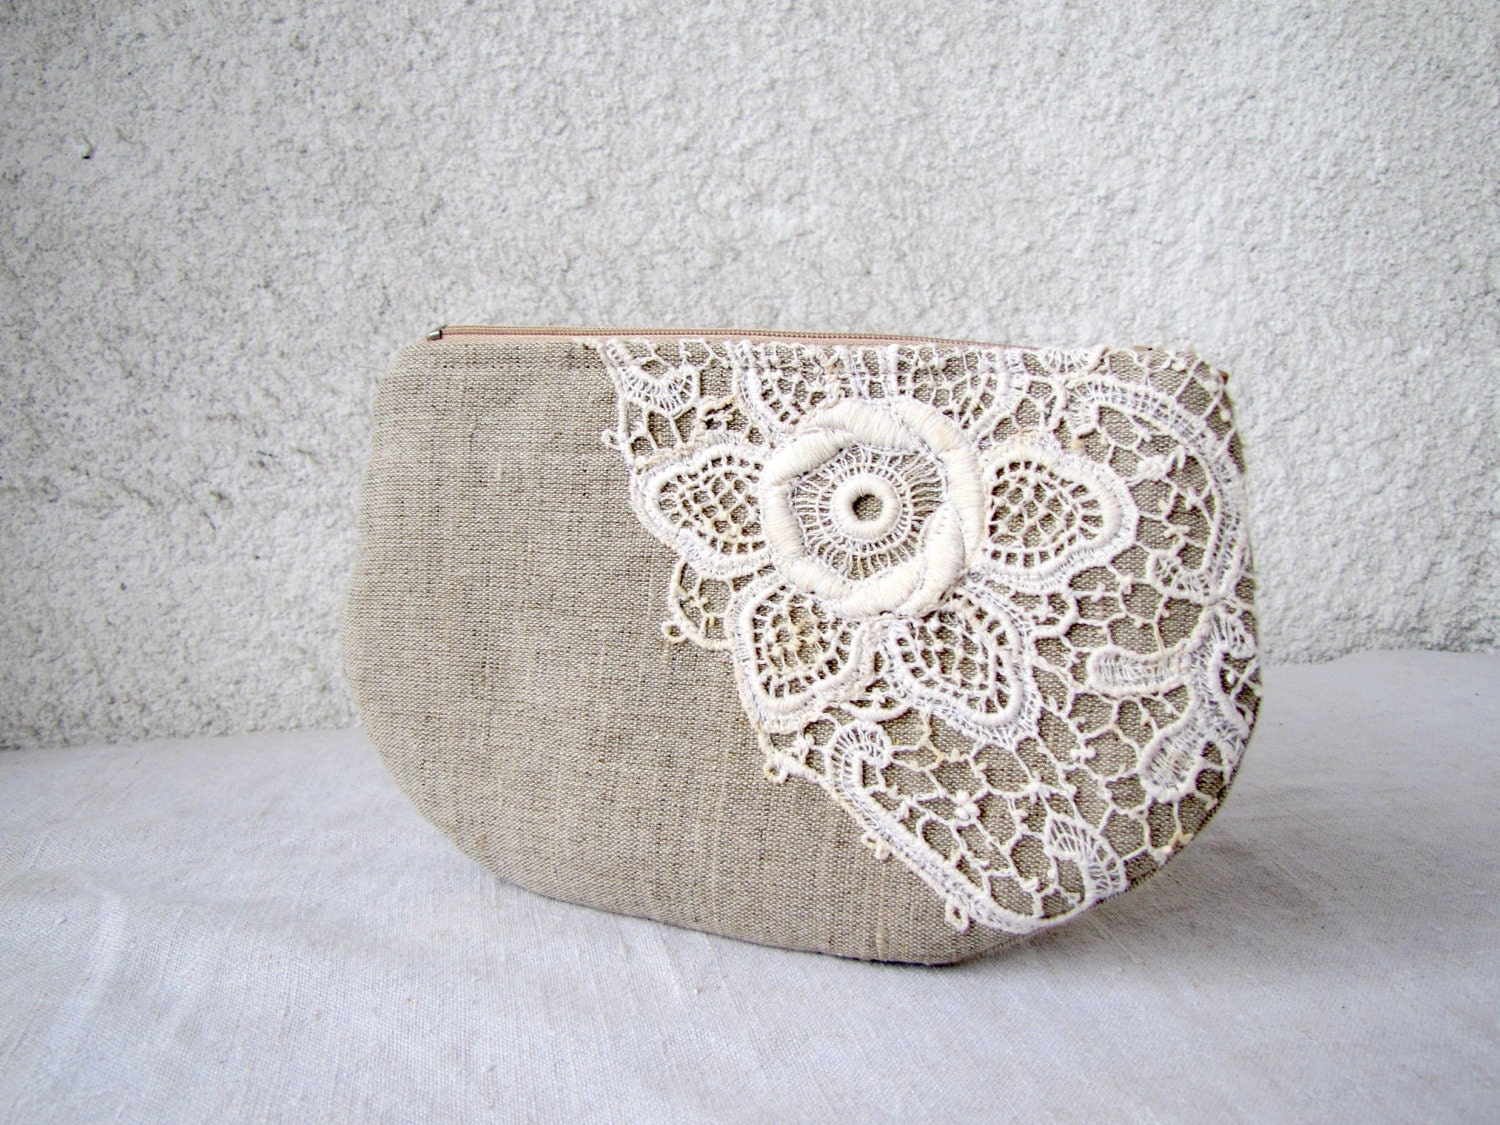 OOAK   zipper pouch, cosmetic bag, small clutch - natural linen and antique lace applique